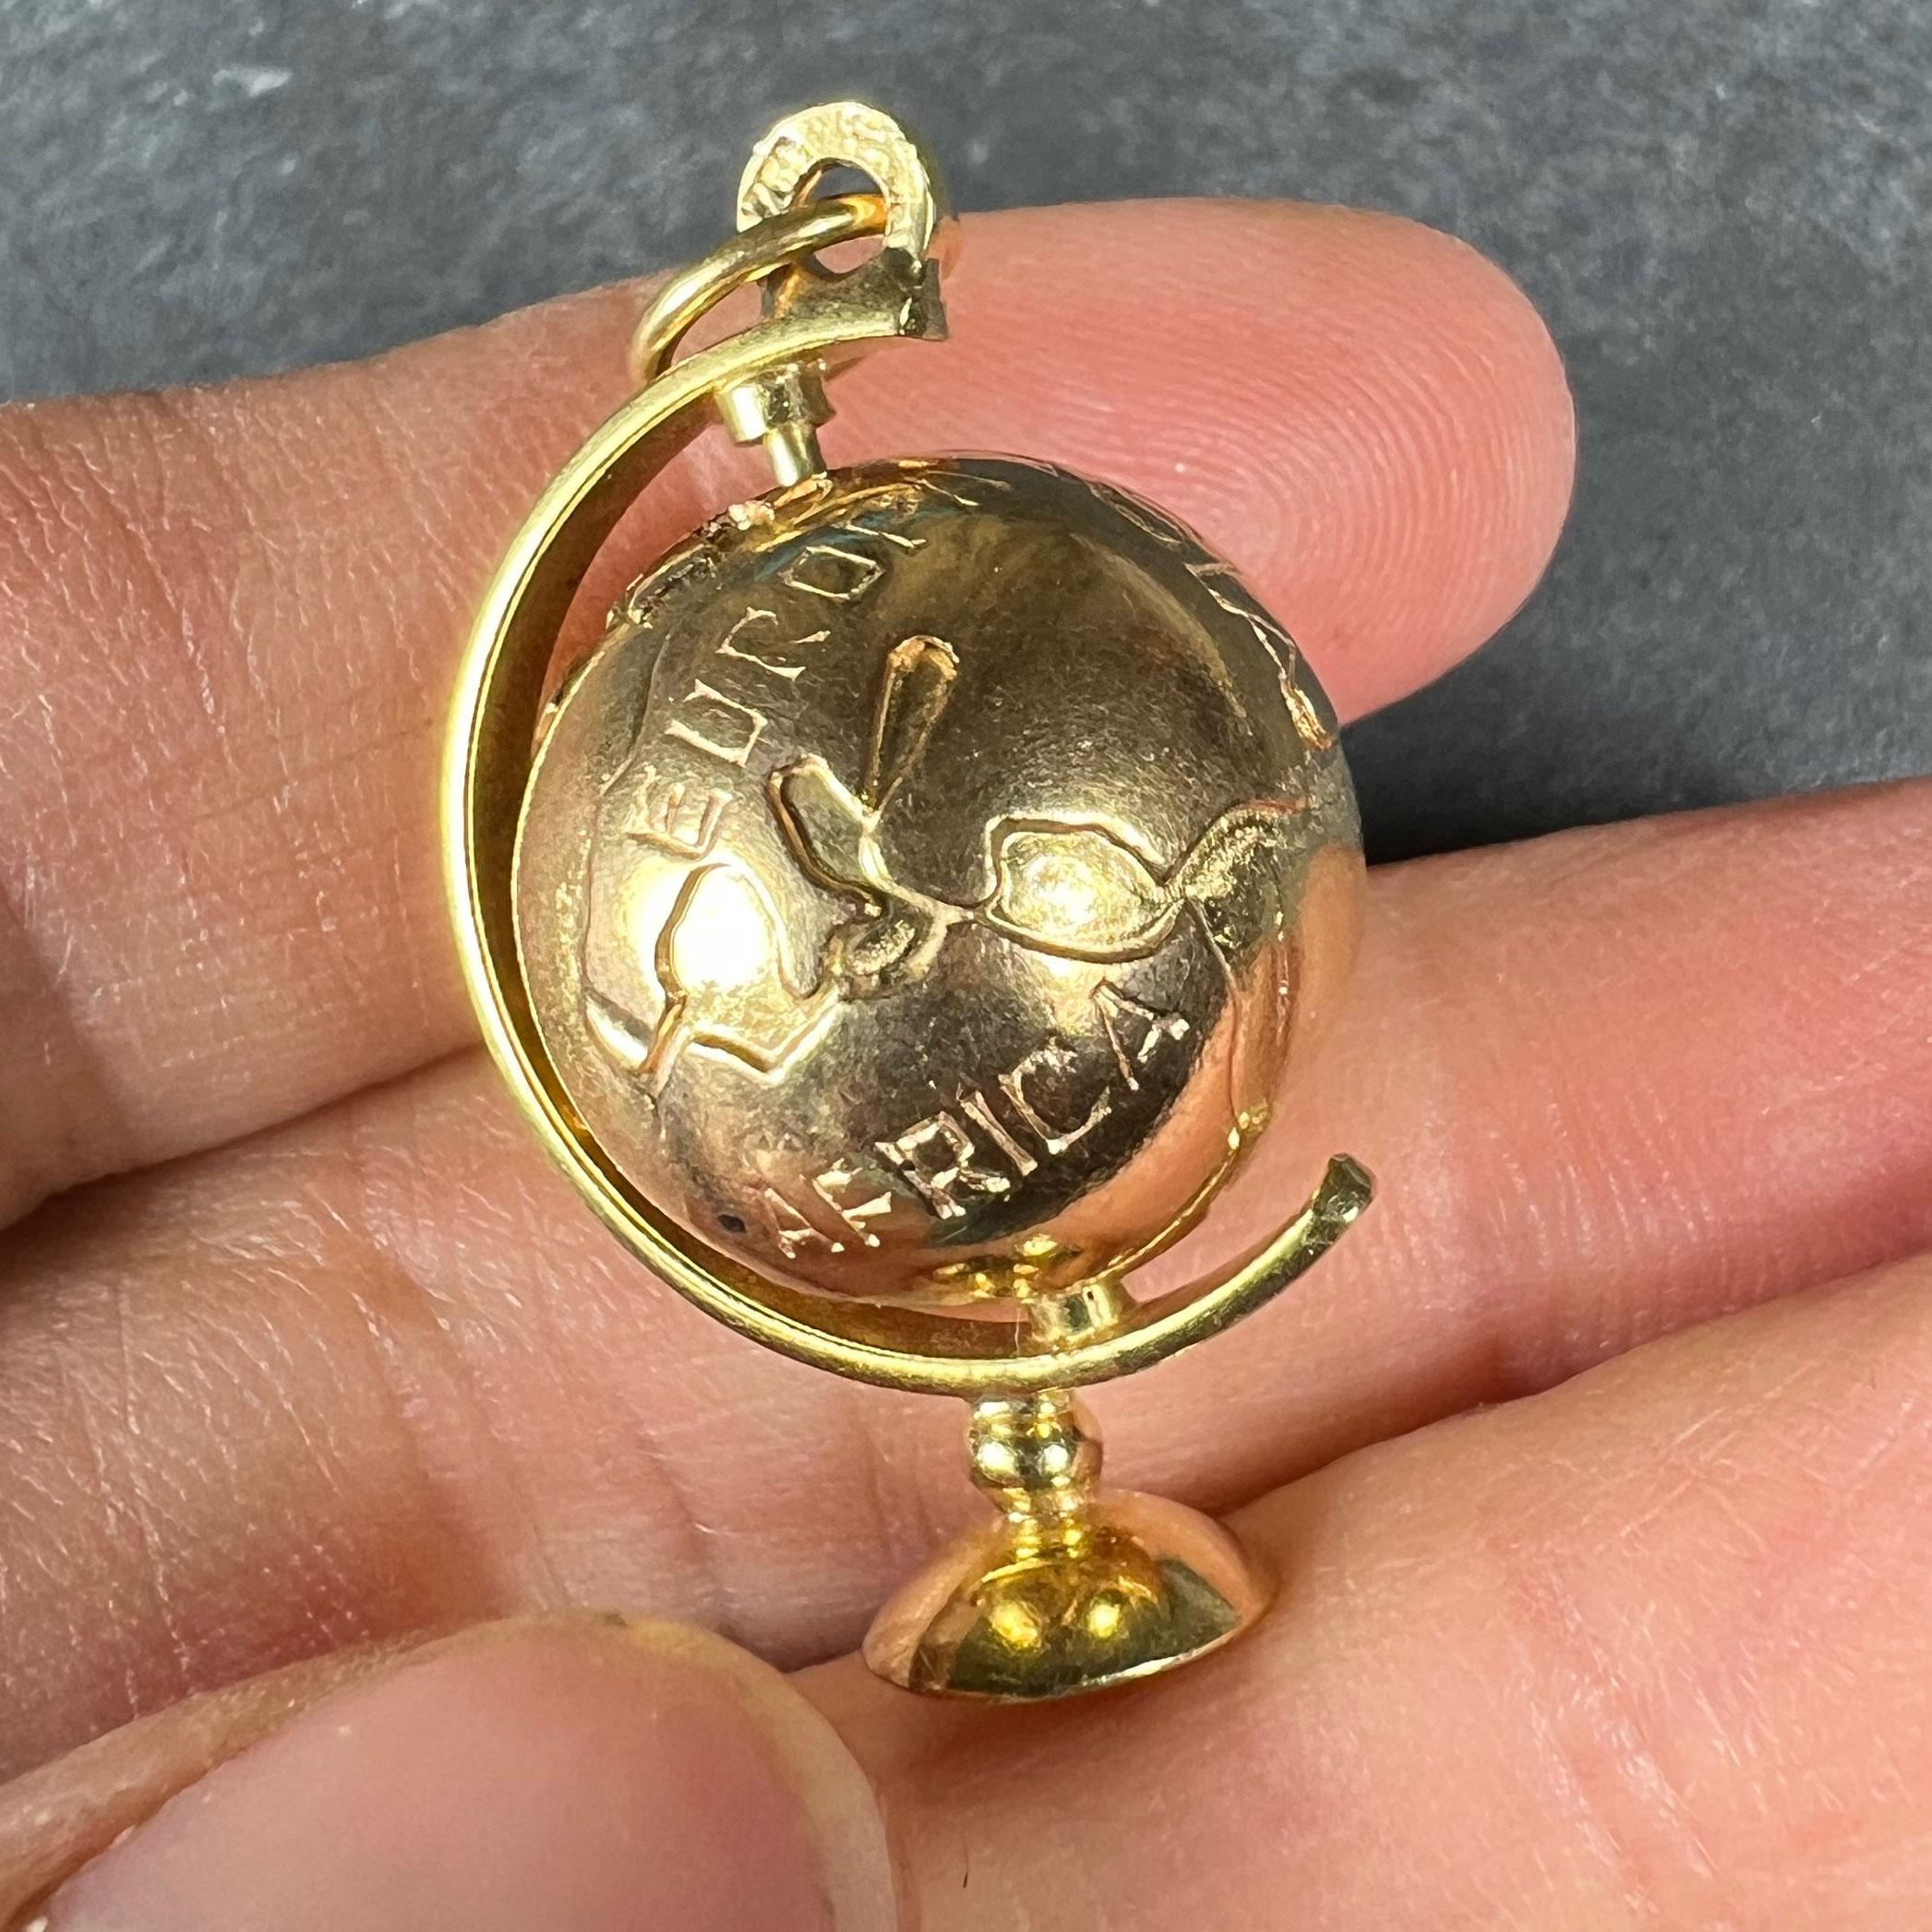 An 18 karat (18K) yellow gold charm pendant designed as a spinning globe. Stamped 750 for 18 karat gold.

Dimensions: 3 x 2 x 1.5 cm (not including jump ring)
Weight: 7.49 grams
